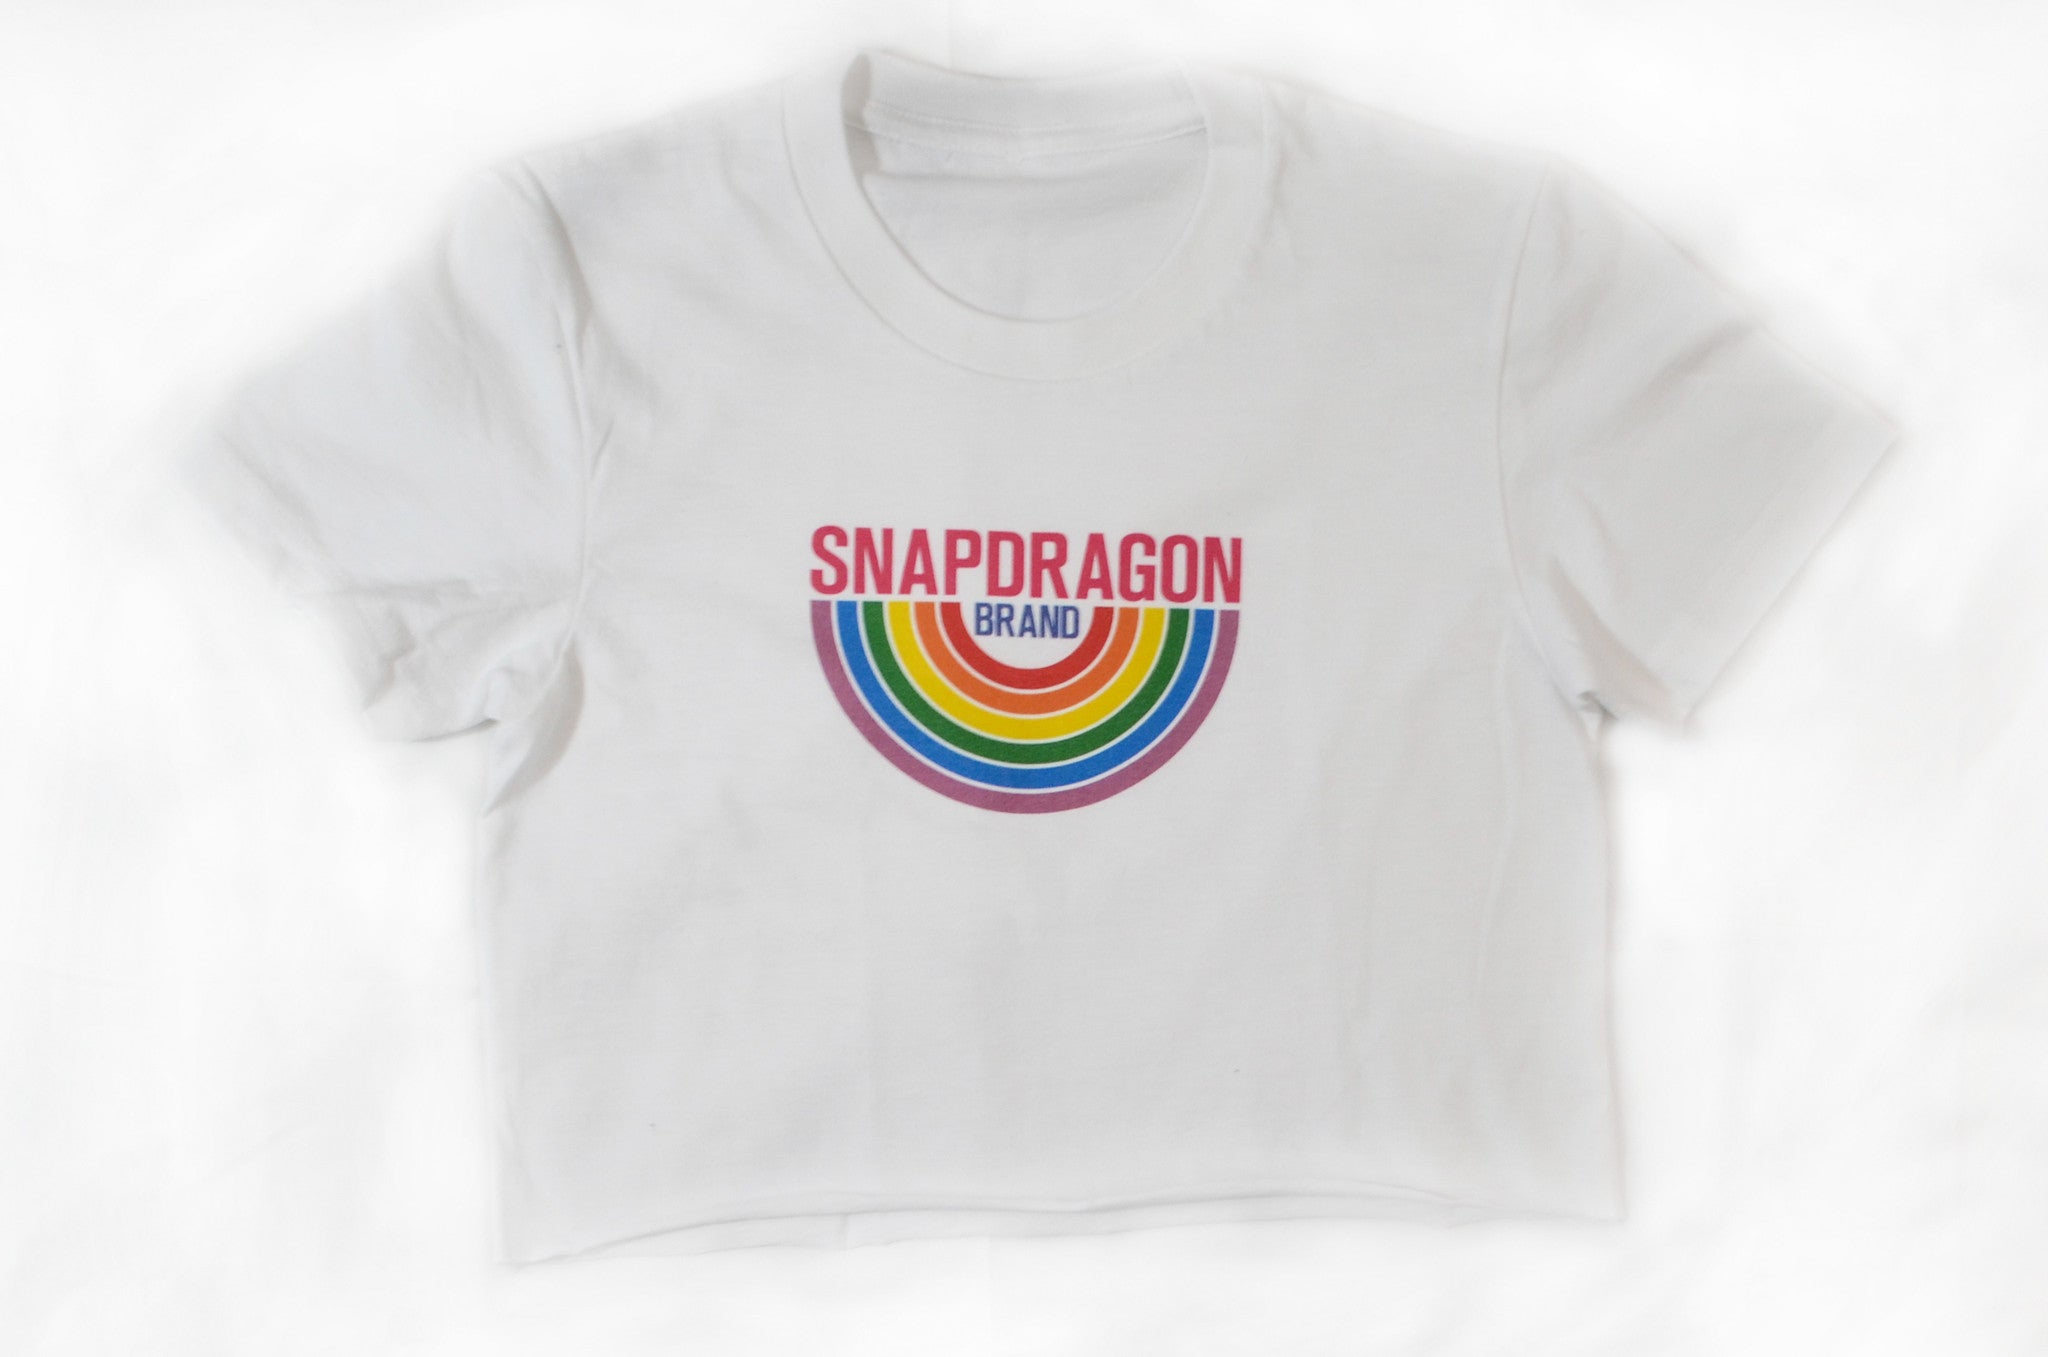 Snapdragon Brand Clothing Granny Square Crochet Print rainbow crop top cropped tee t-shirt in style logo features a vintage psychedelic boho feel and a rainbow of colors. Made of comfortable cotton. lgbt lgbtq lgbtqi